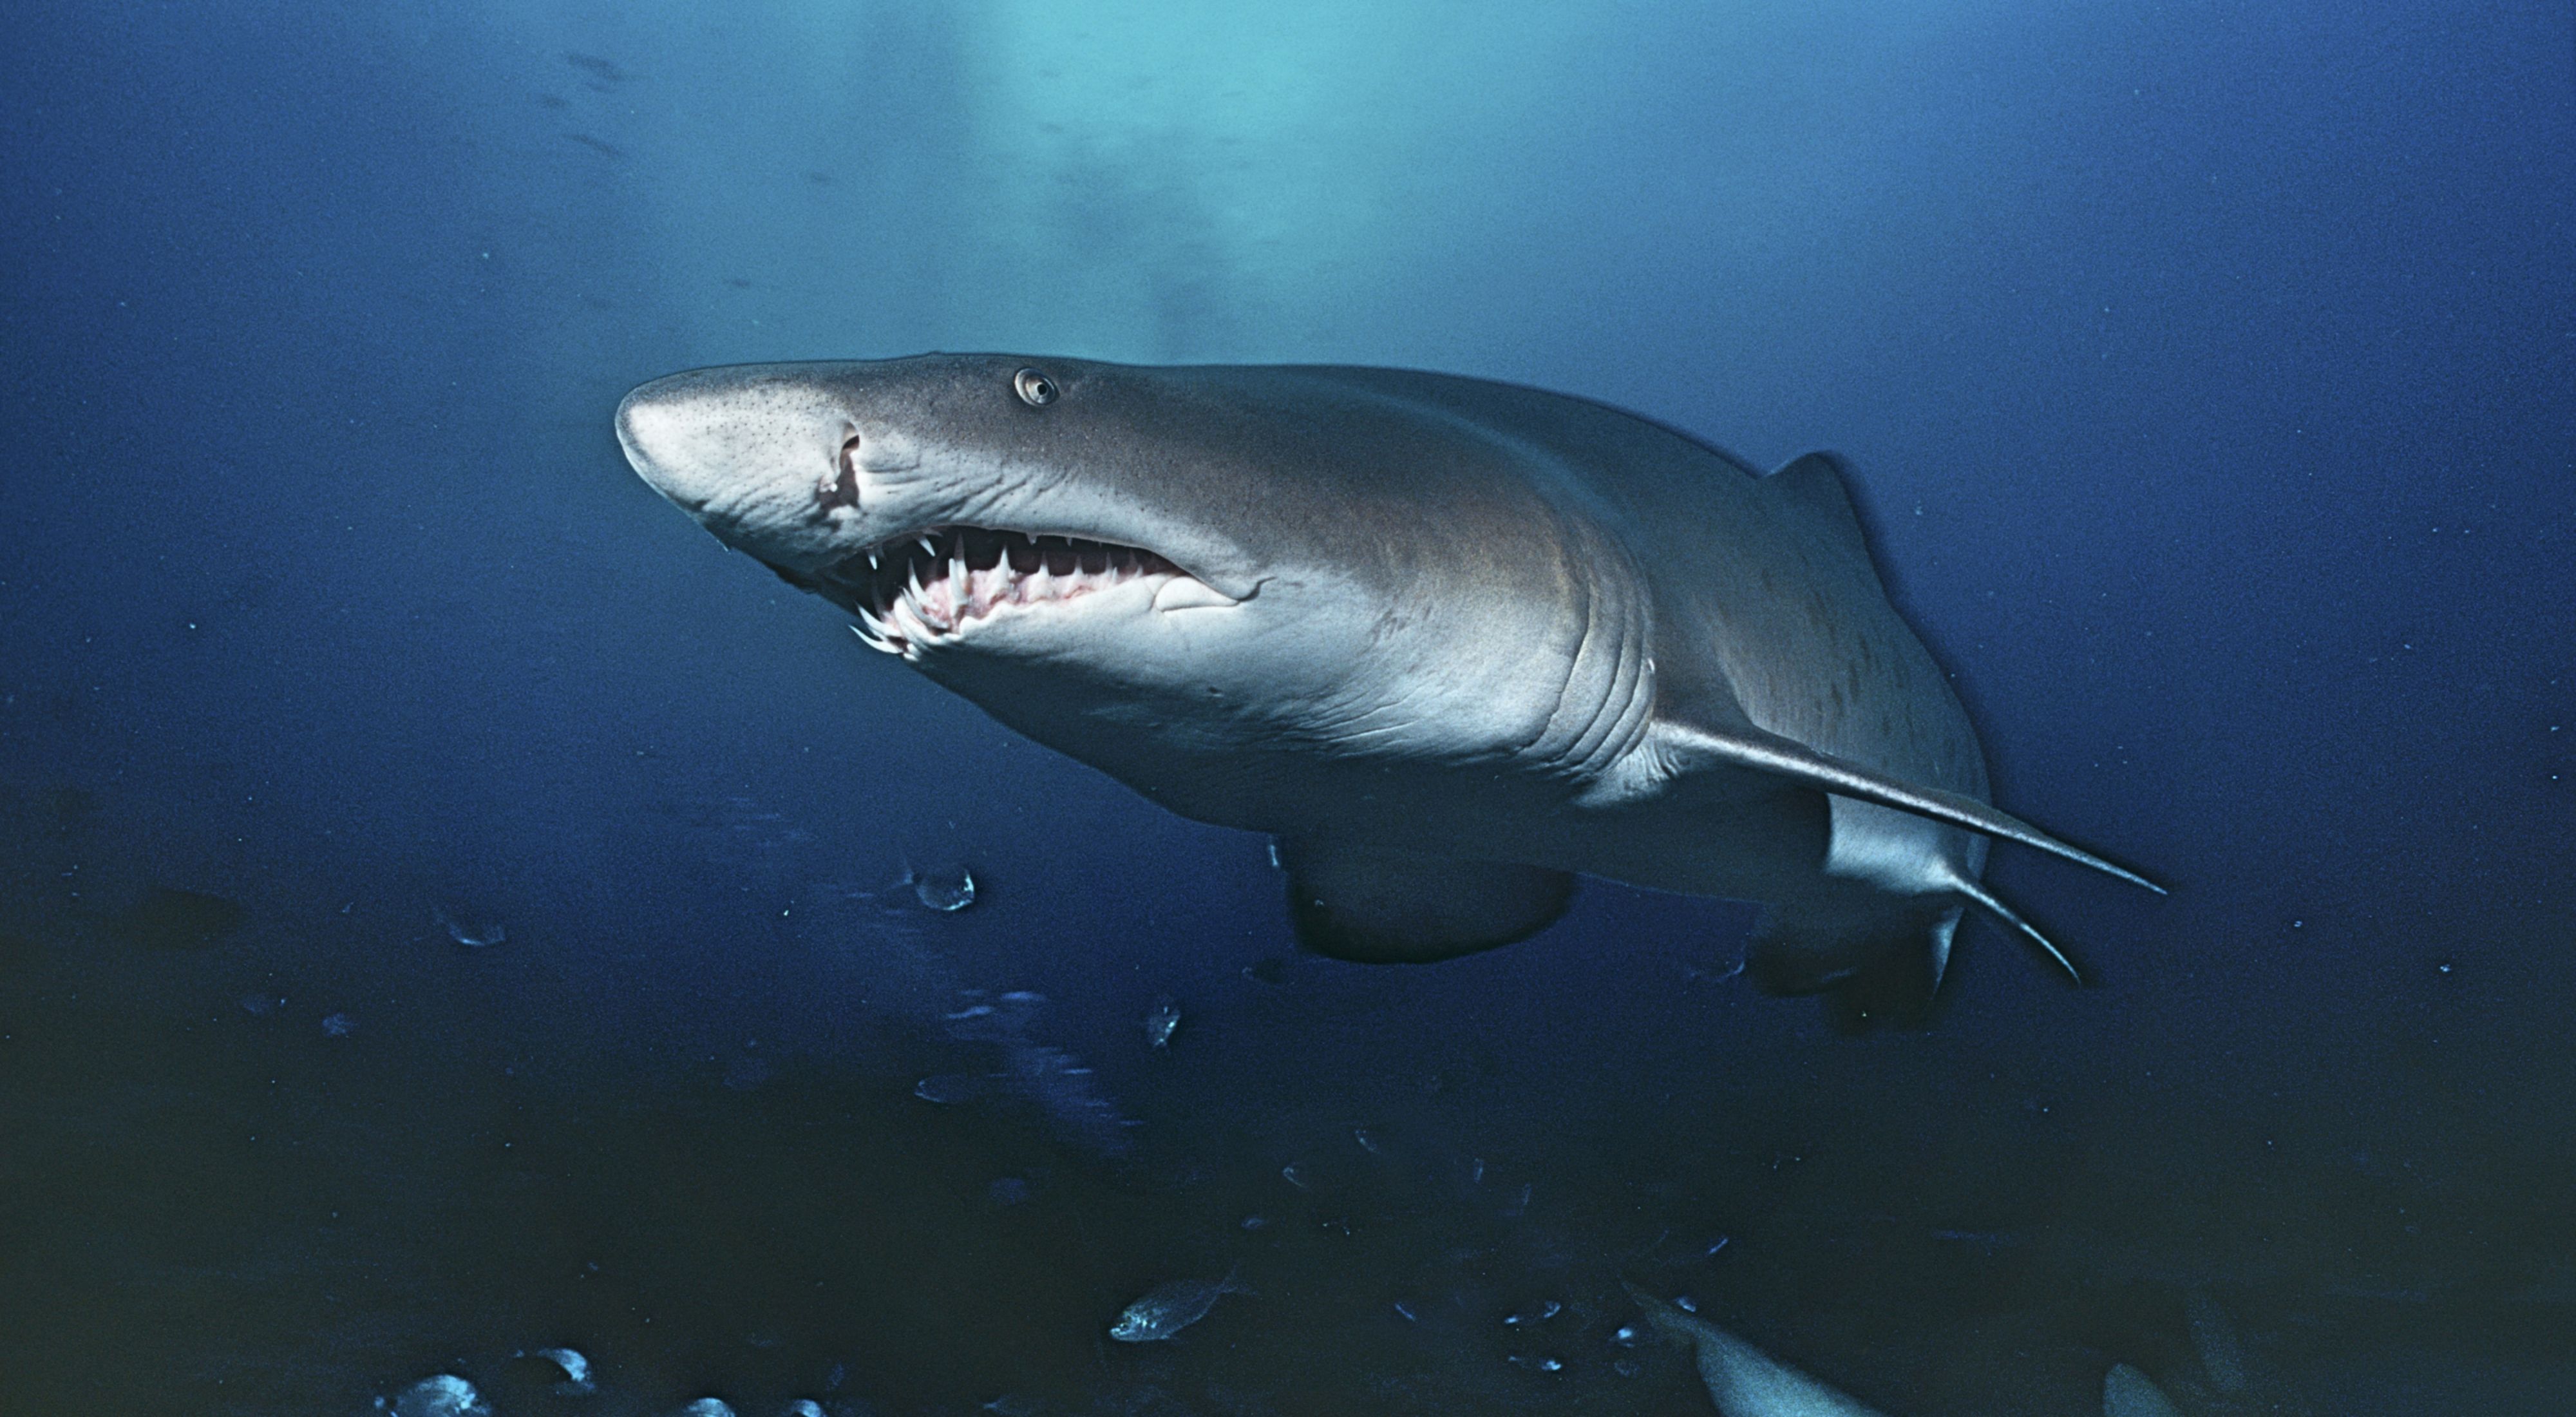 Tiger shark migrations are shifting as temperatures rise •